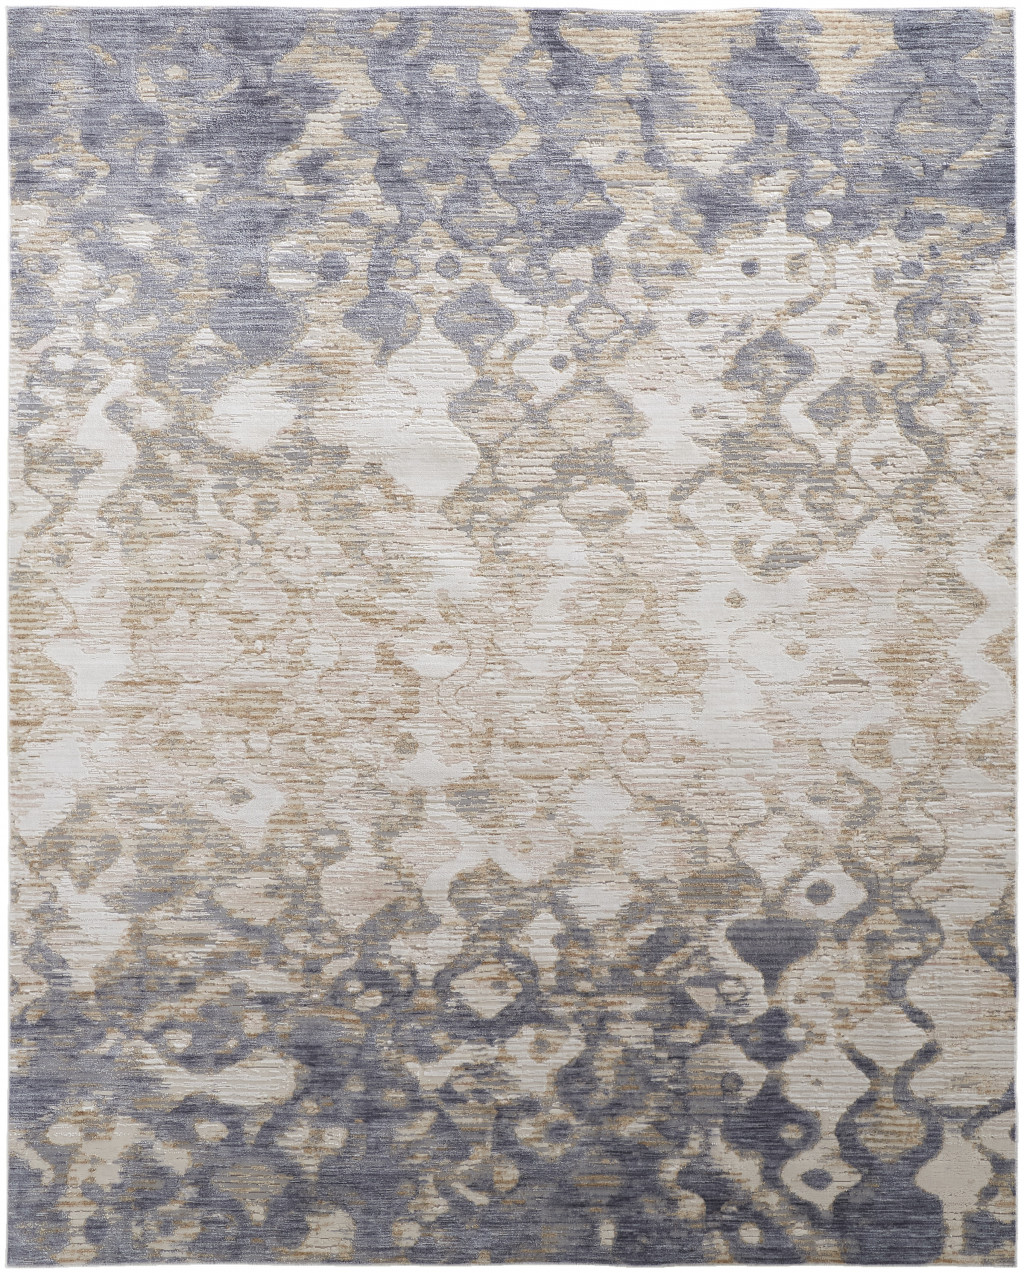 10' X 13' Tan Ivory And Blue Abstract Power Loom Distressed Area Rug-514161-1